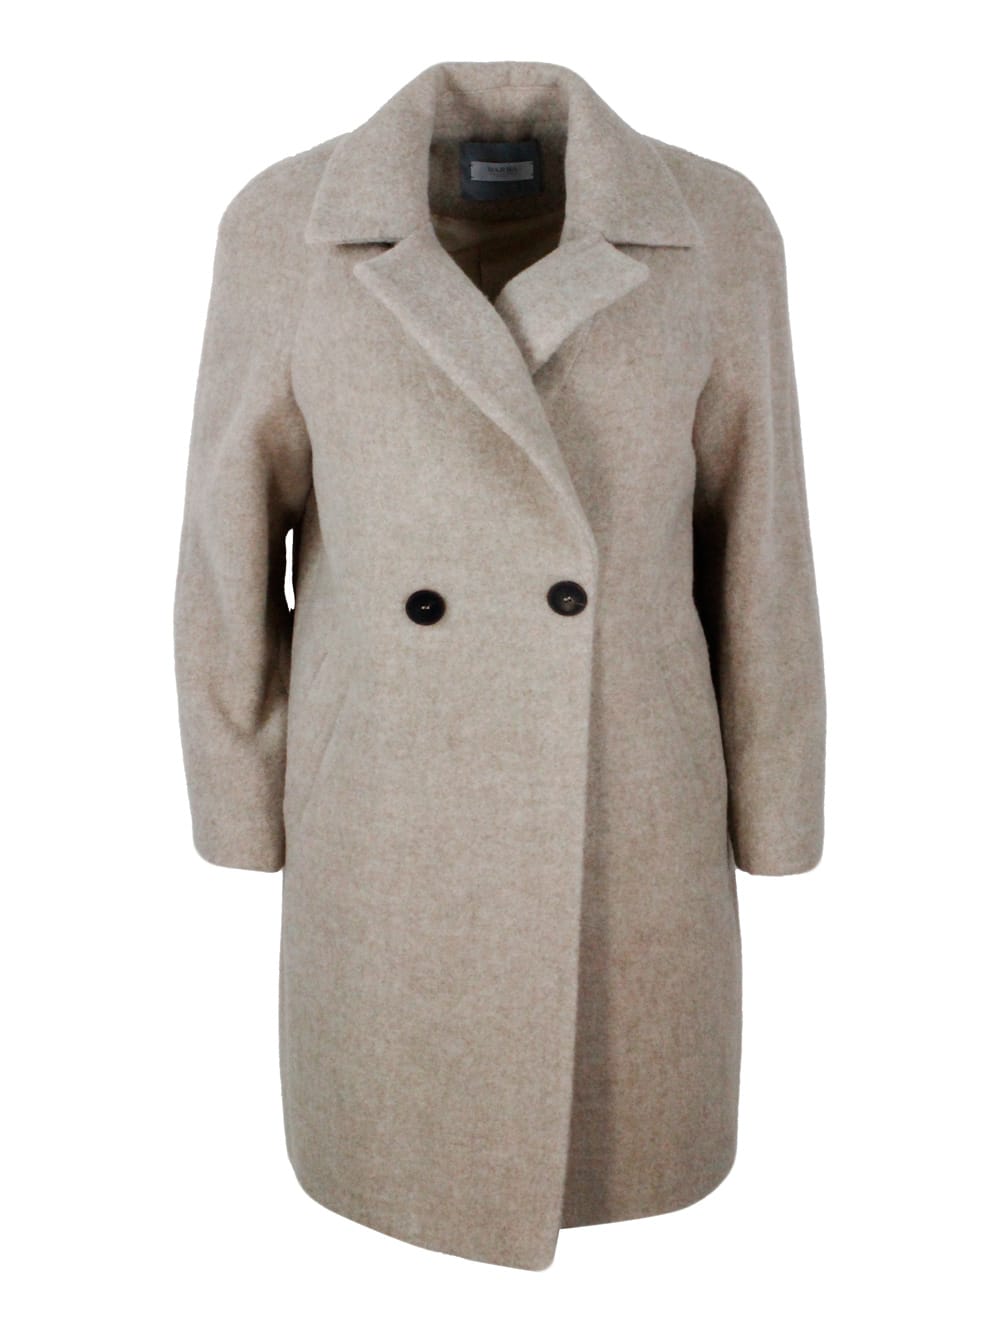 Barba Napoli Double-breasted Coat Made Of Soft And Precious Alpaca And Wool With Side Pockets And Button Closure In Beige